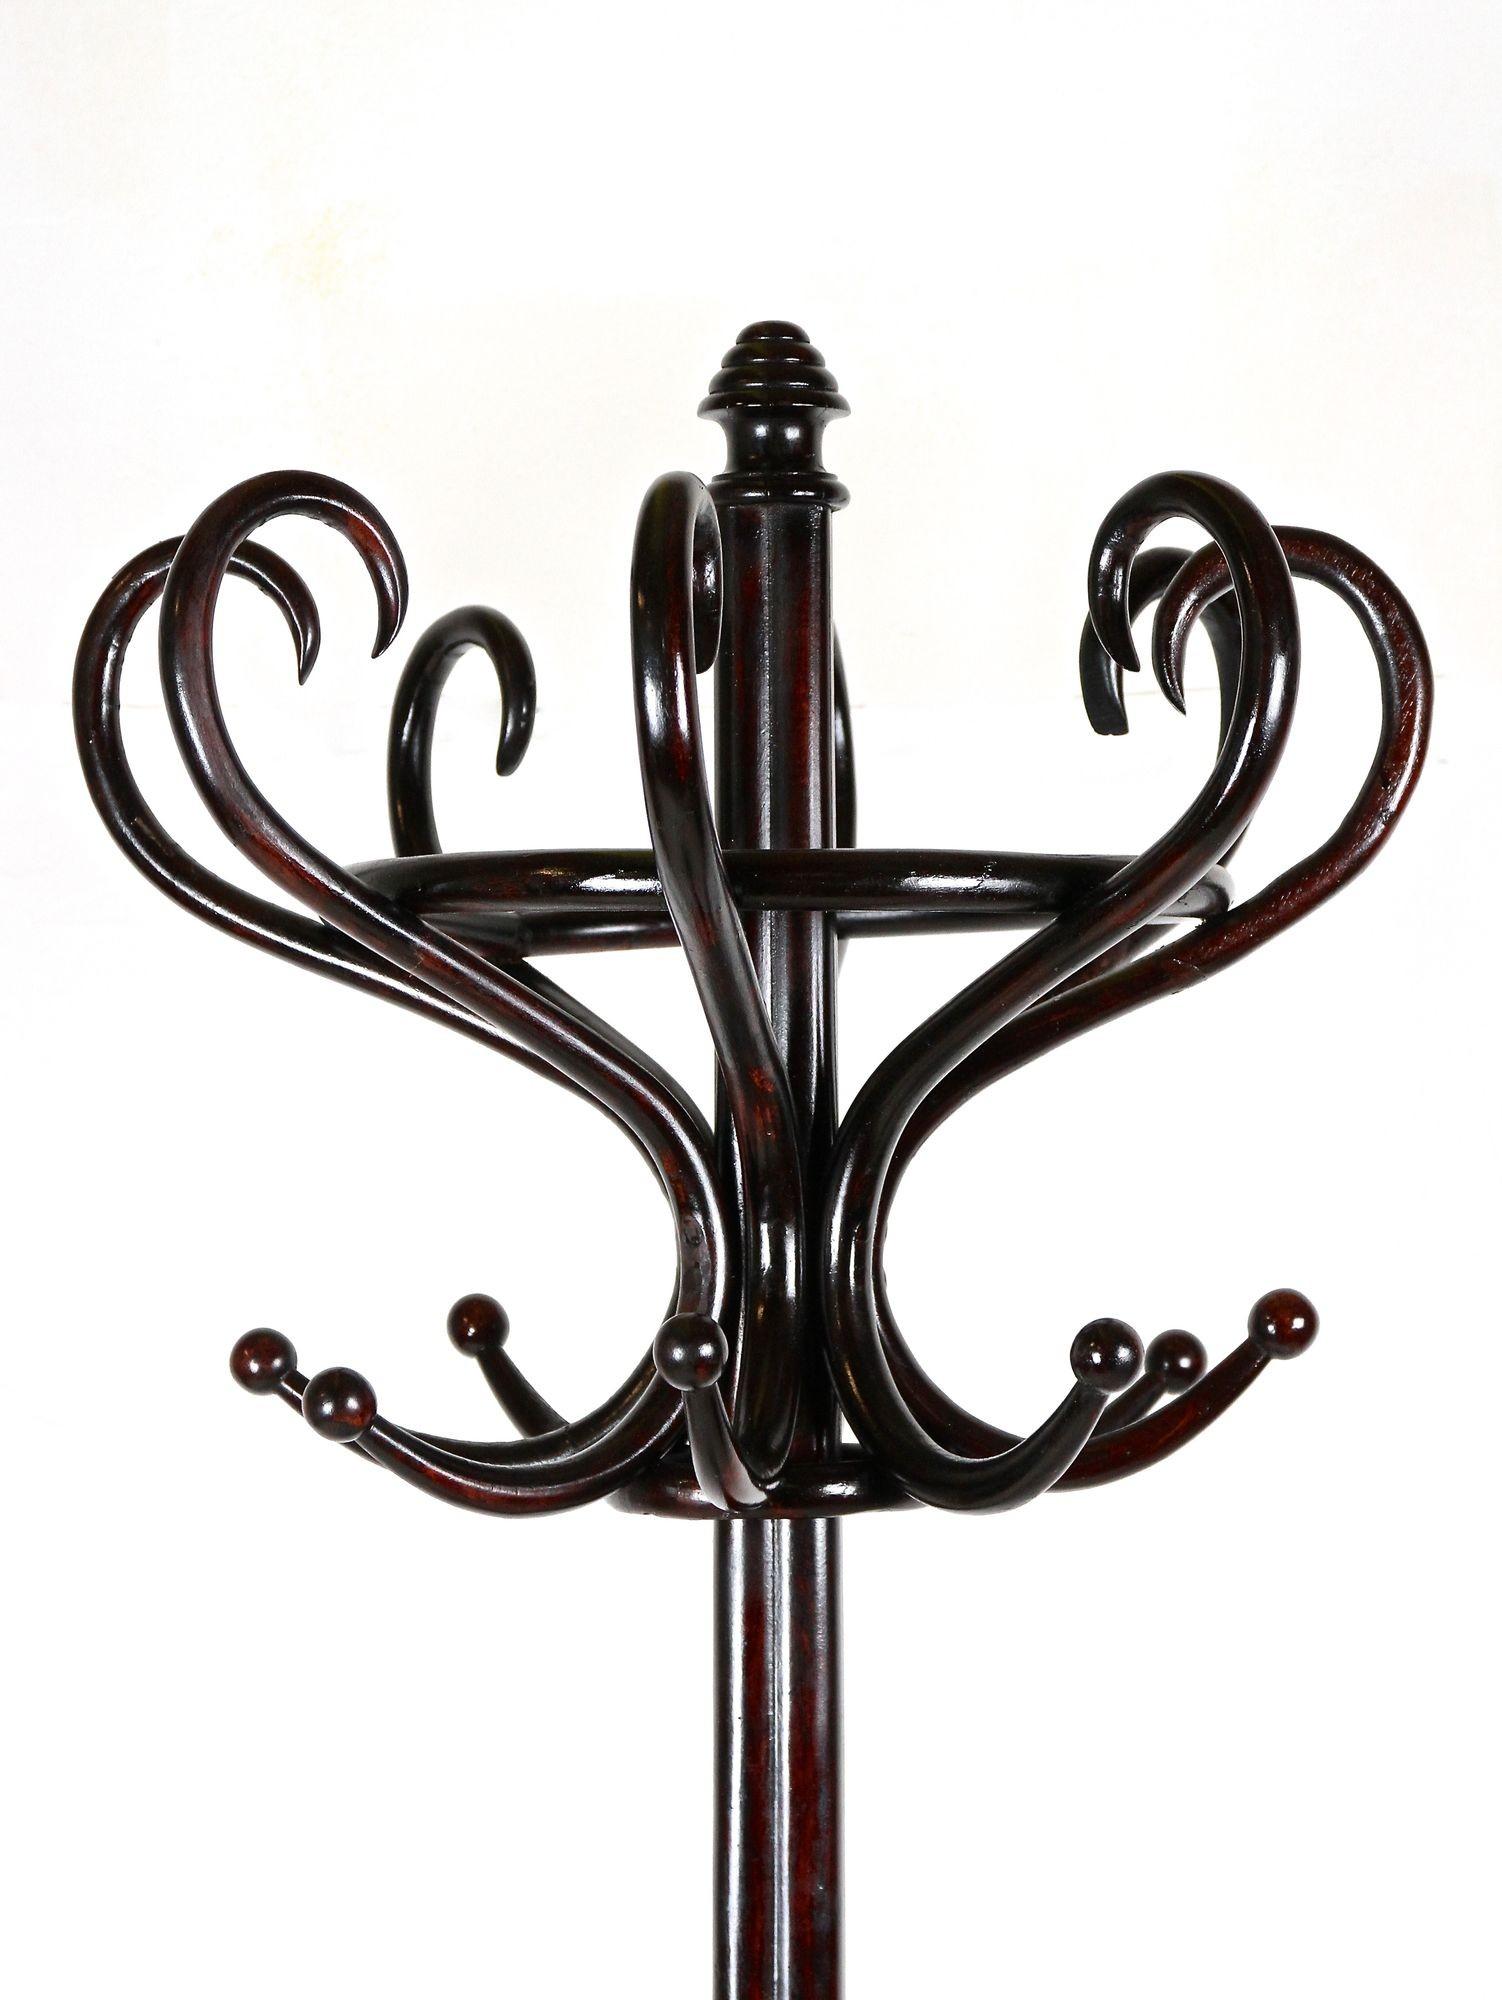 Thonet Coat Rack/ Wardrobe Stand Bentwood Polished, Art Nouveau, AT ca. 1905 For Sale 9